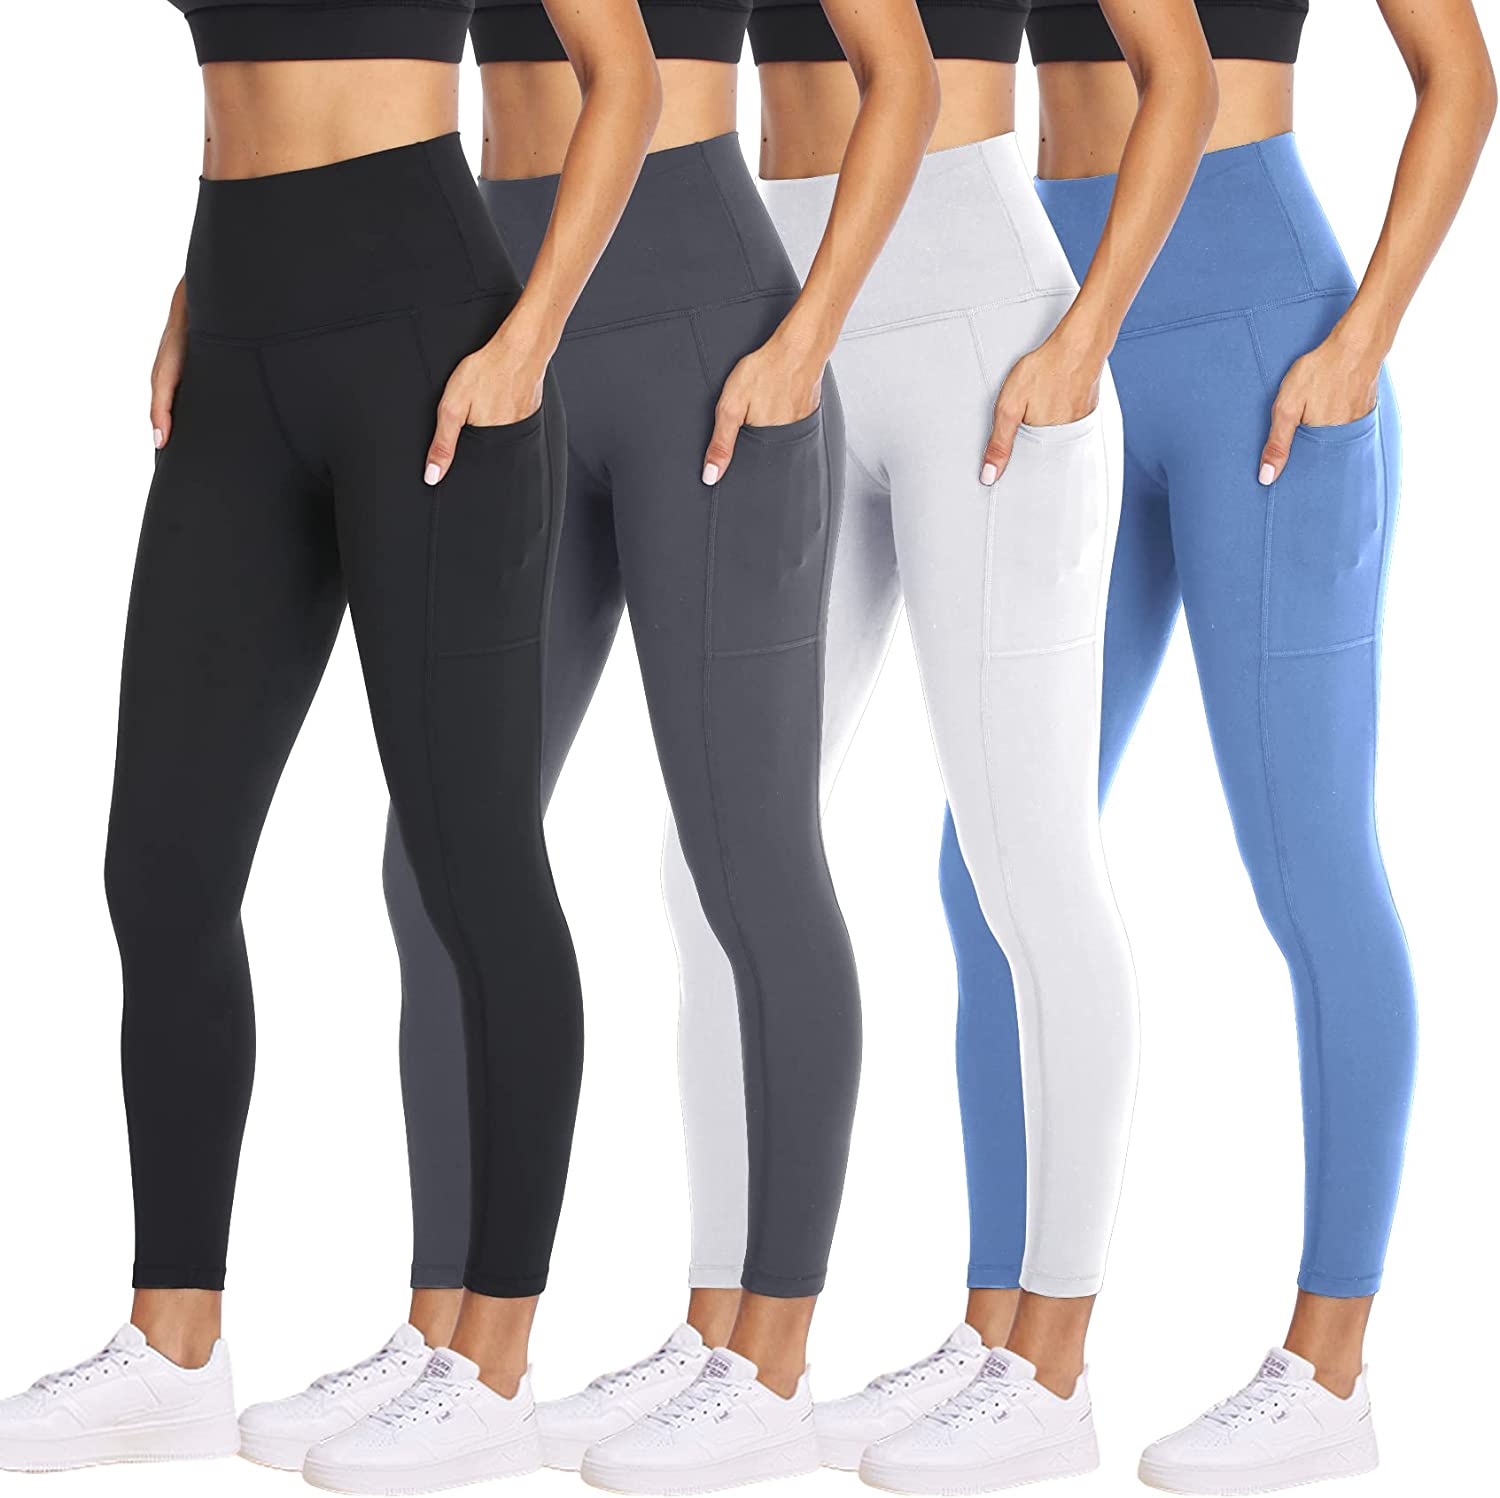  NexiEpoch 4 Pack Leggings with Pockets for Women- High